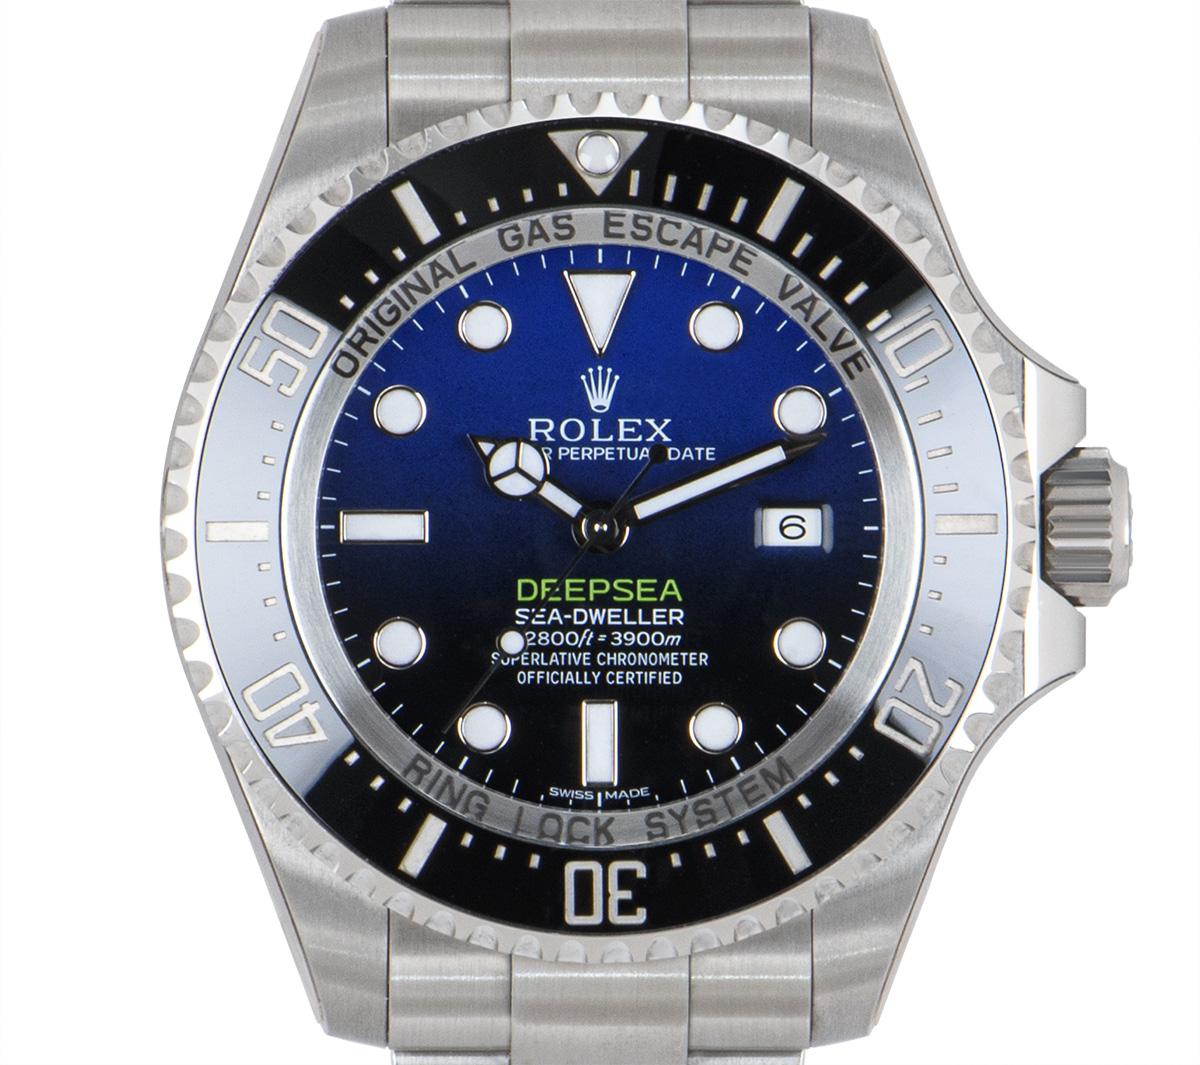 An unworn Deepsea Sea-Dweller in Oystersteel by Rolex, featuring a D-Blue dial under a domed scratch-resistant sapphire crystal. The stainless steel uni-directional rotatable bezel has a ceramic insert, with platinum coated 60-minute